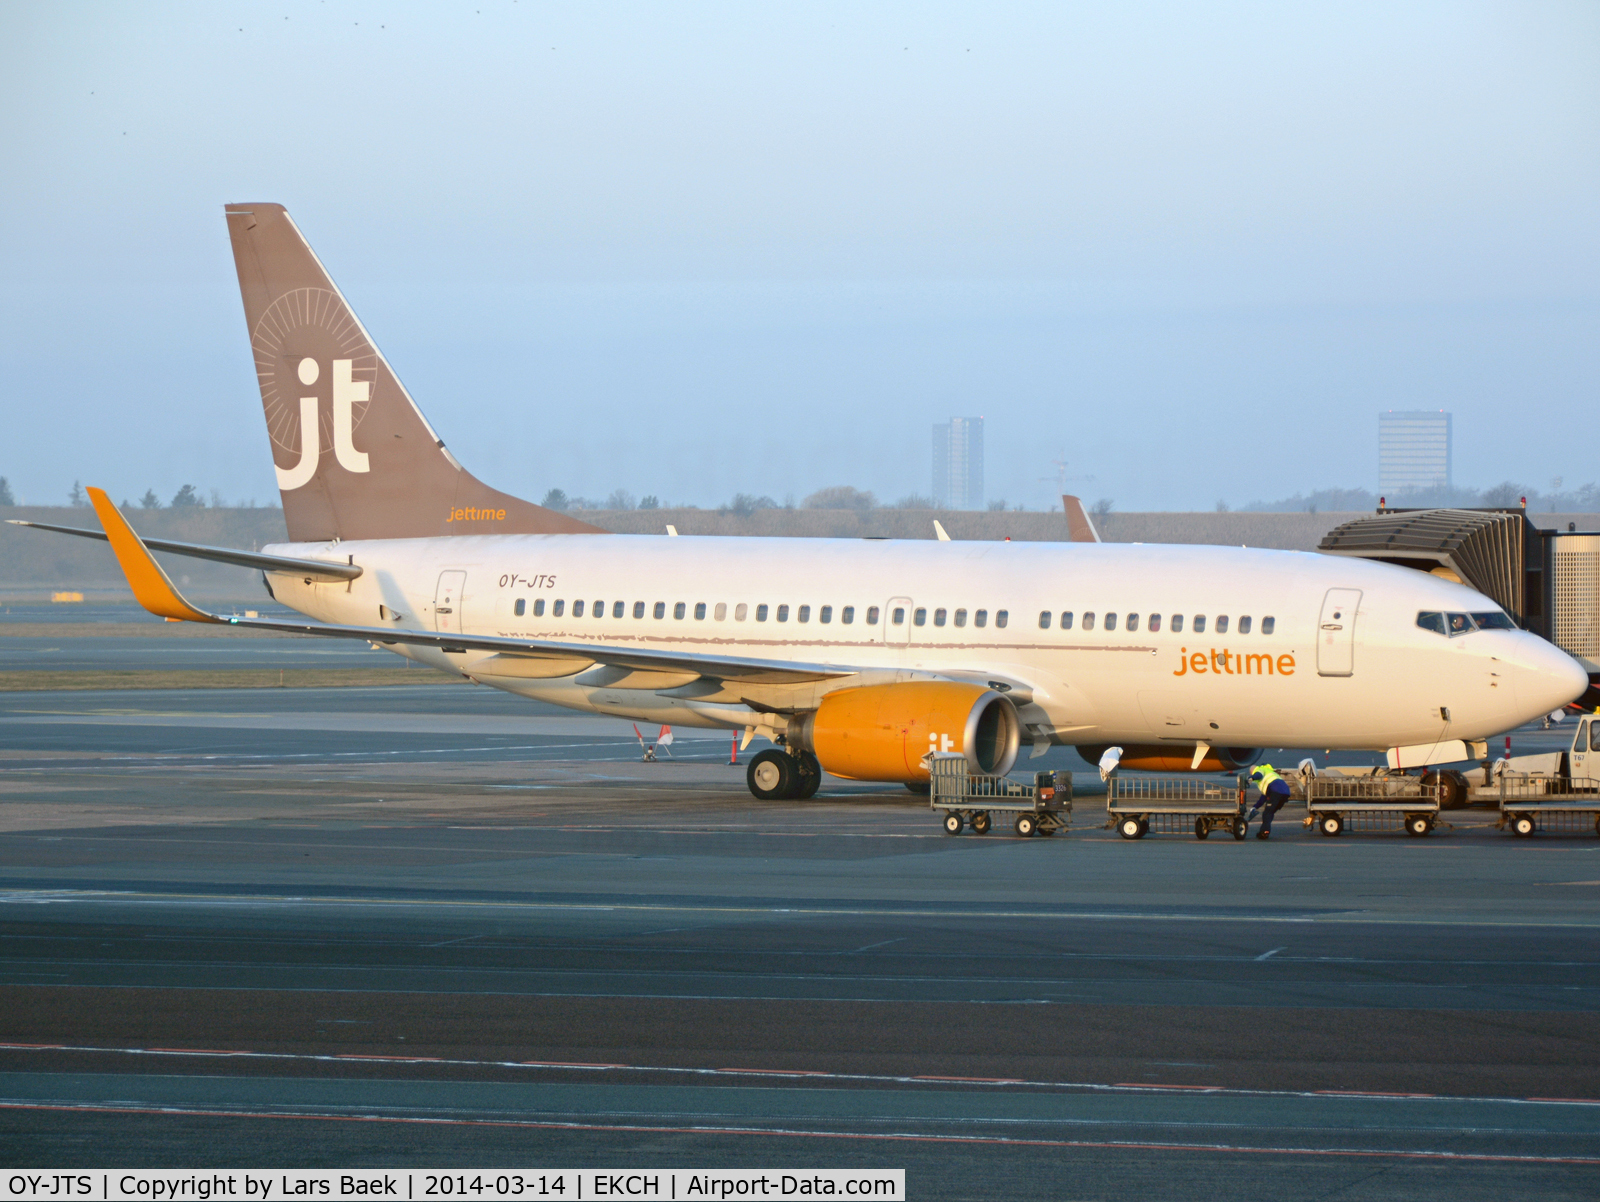 OY-JTS, 2003 Boeing 737-7K2 C/N 33465, Stand A12, taken from B10 onboard OY-GRN